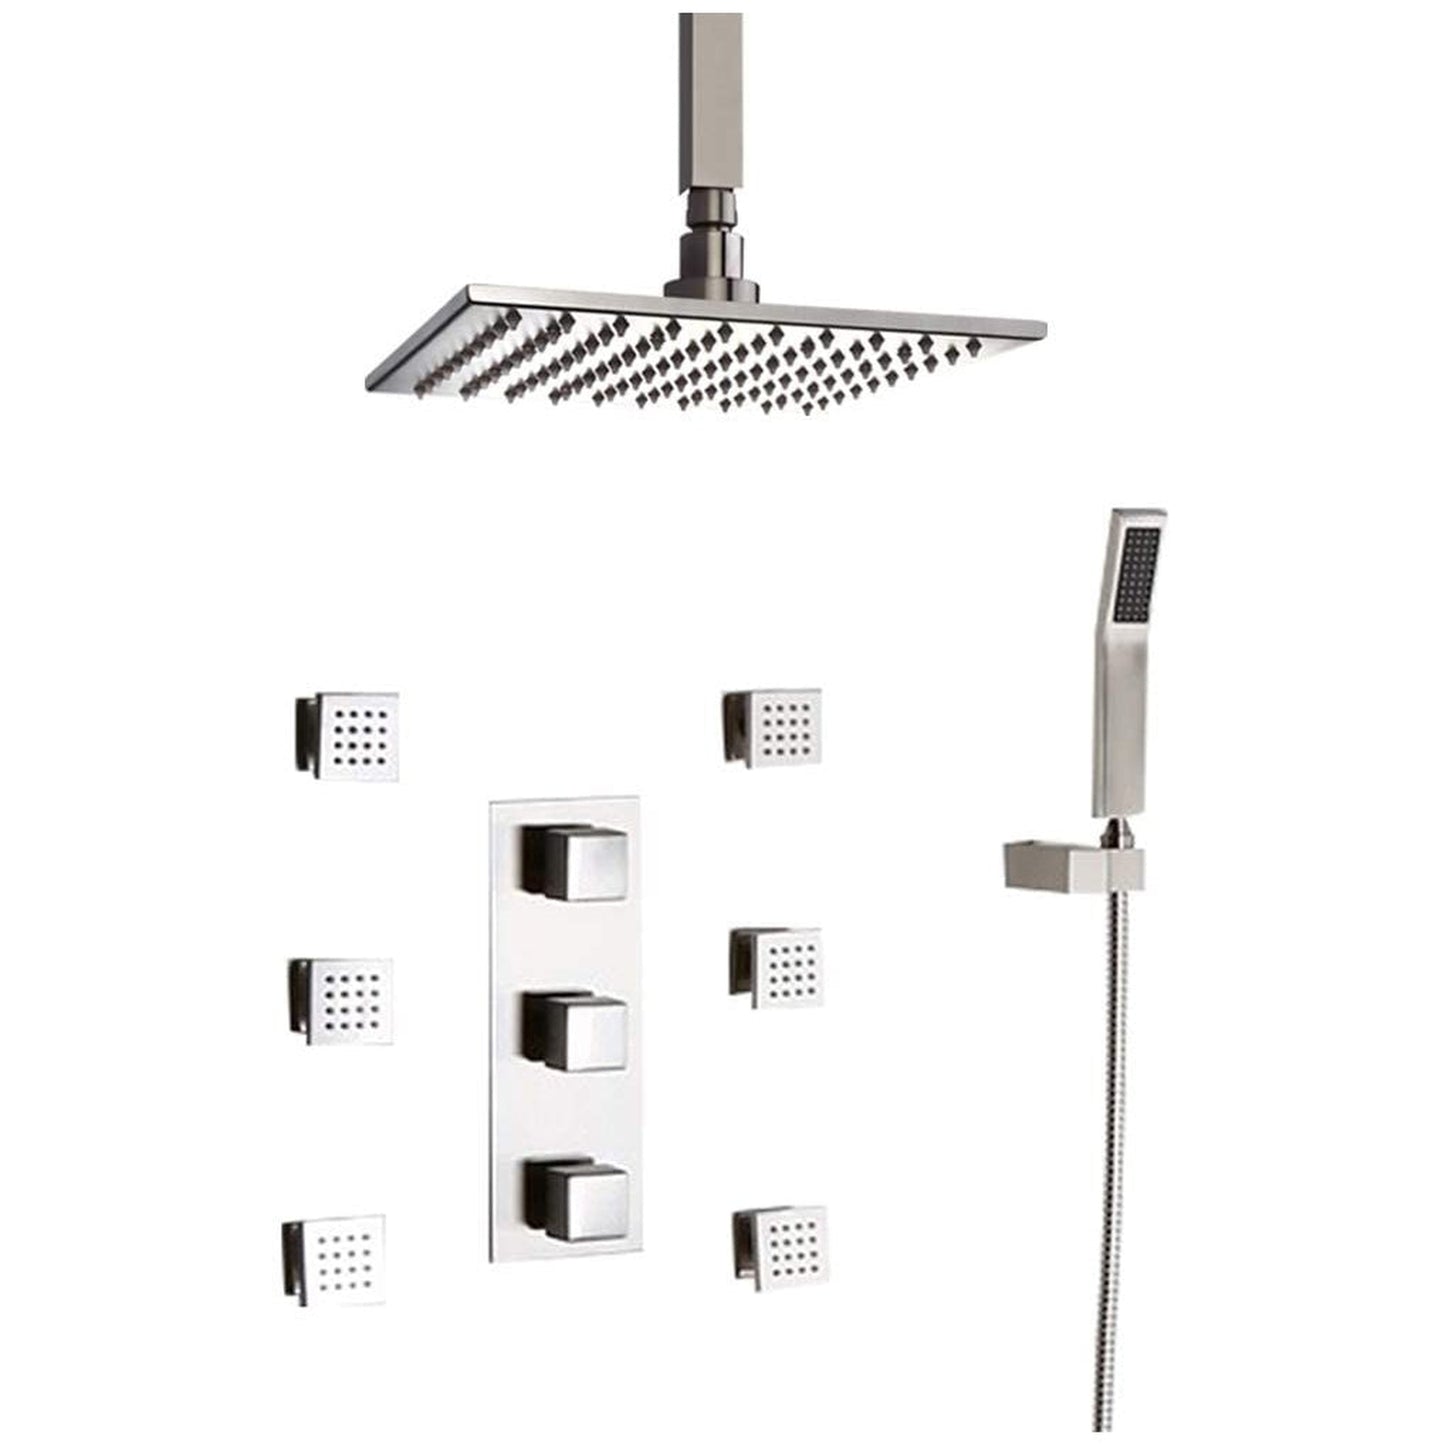 Fontana 10" Chrome Square Ceiling Mounted Thermostatic Rainfall Shower Set With 6-Jet Body Sprays and Hand Shower